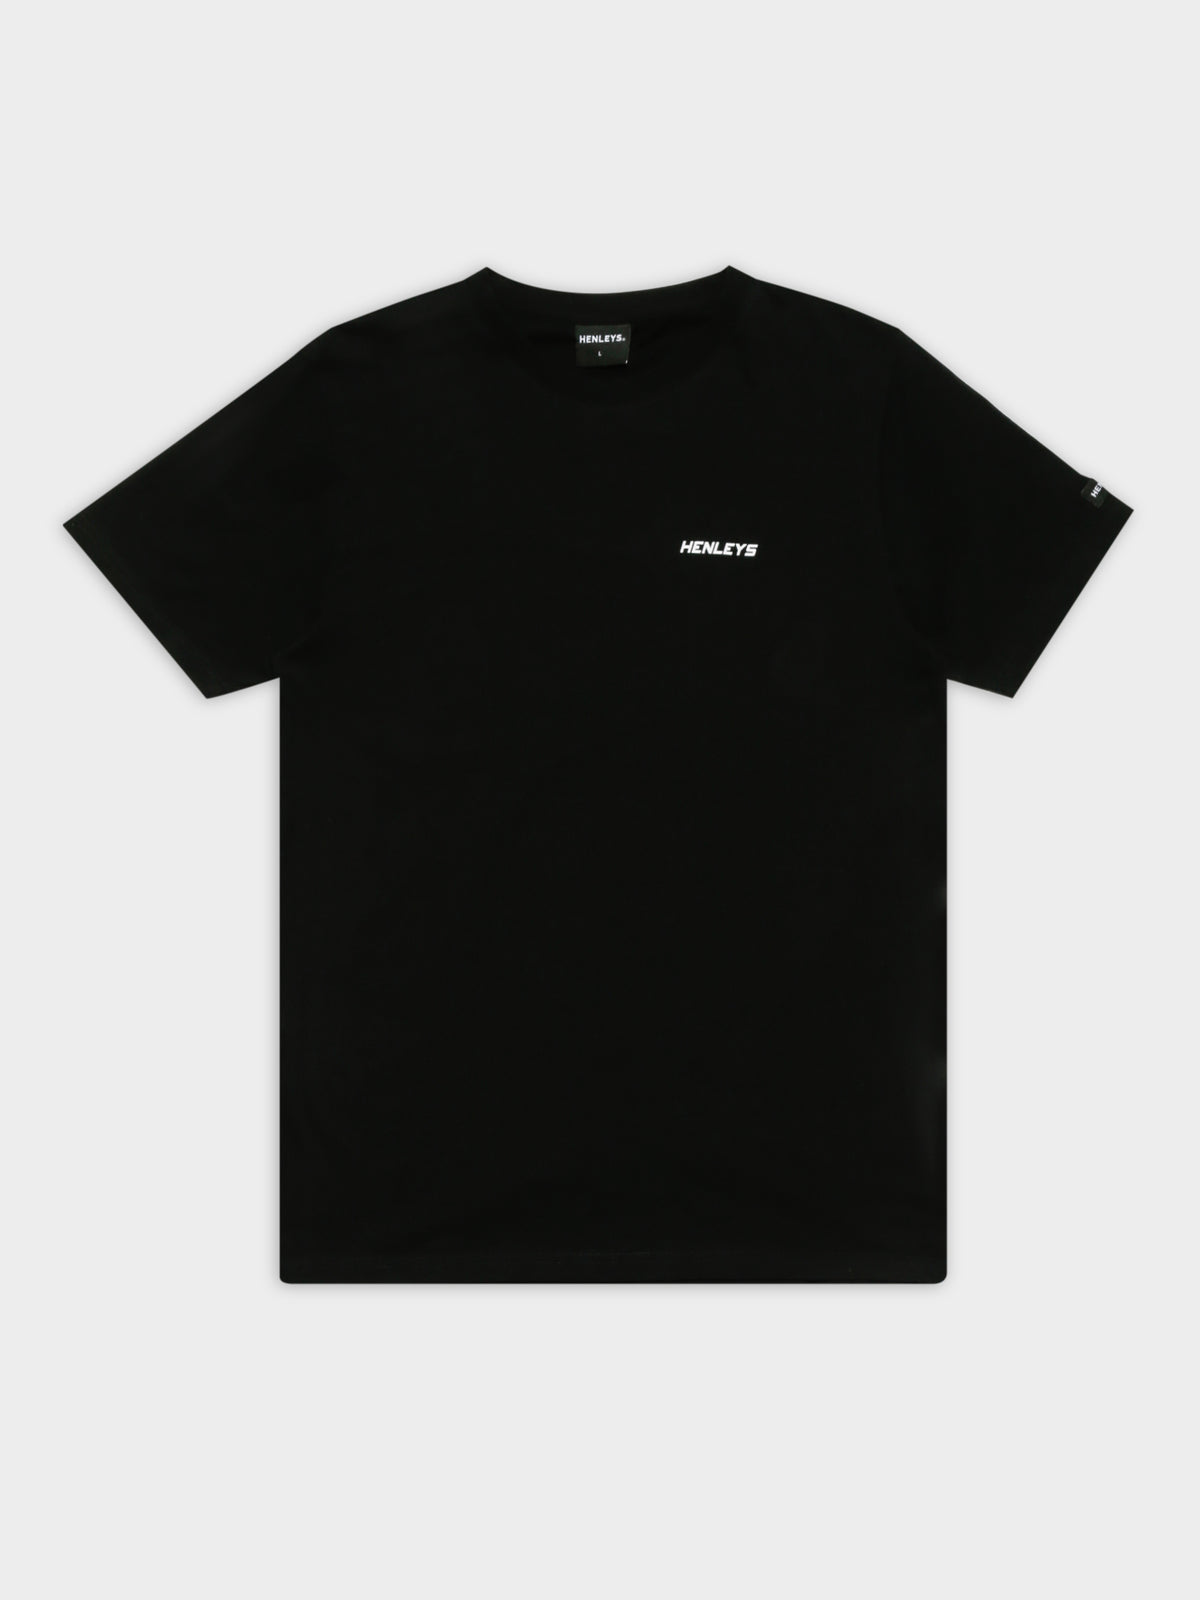 Vice T-Shirt in Black